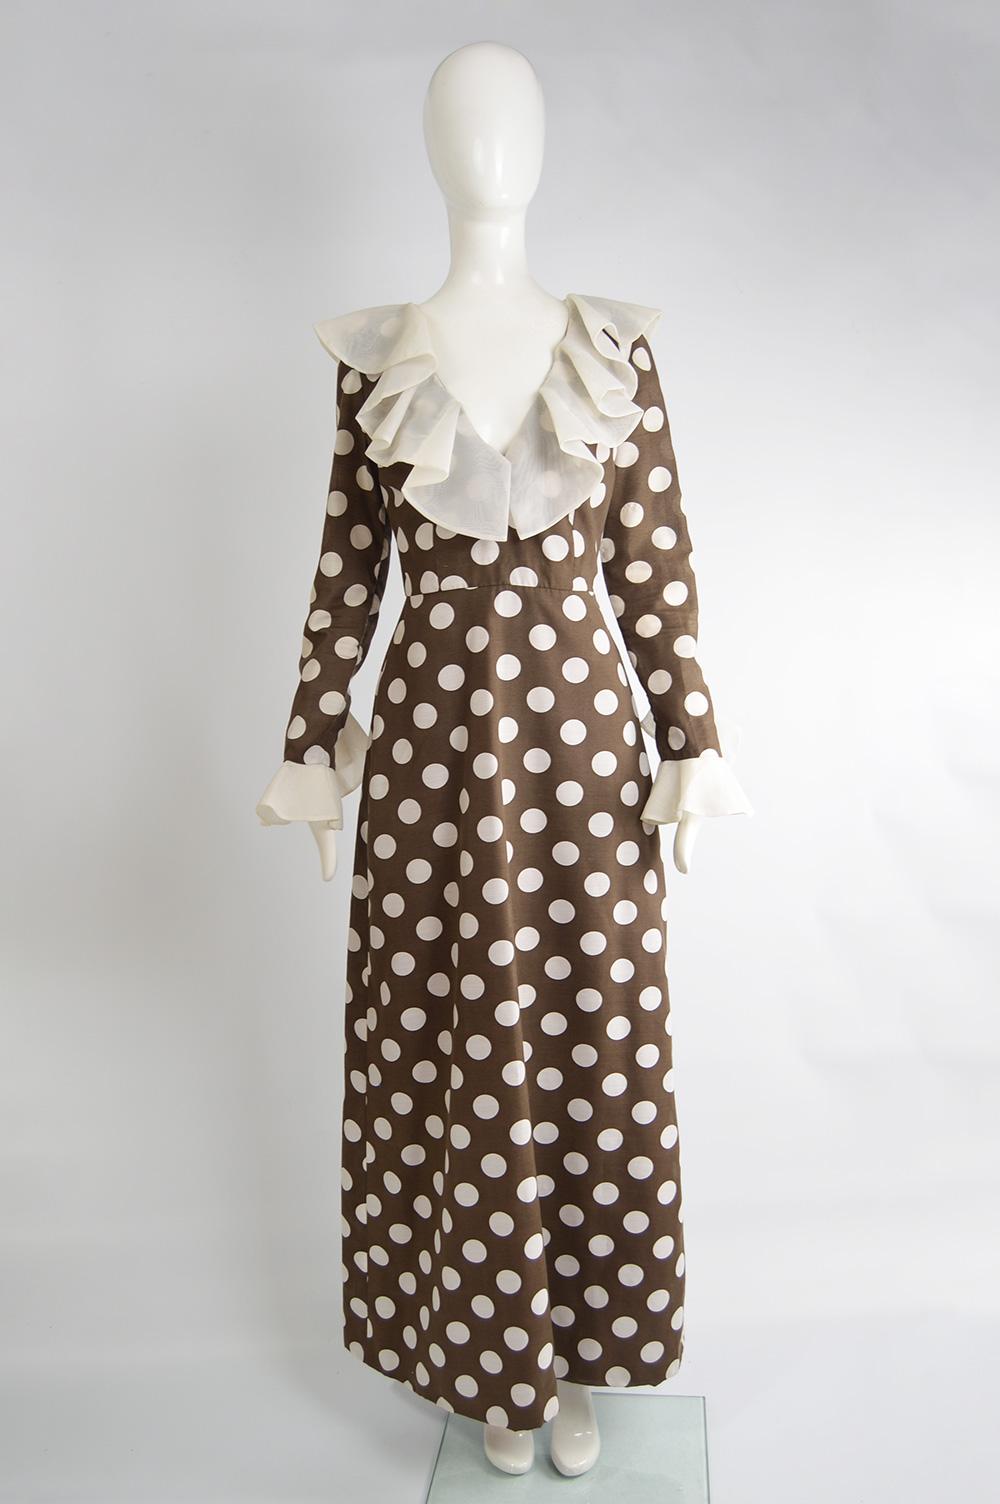 A fabulous vintage mod maxi dress from the 60s by Hershelle Young Mayfair. In a brown cotton fabric with a white oversized polka dot print and organza collar and cuffs. Perfect for an evening event or formal party. 

Size: Not indicated; fits like a